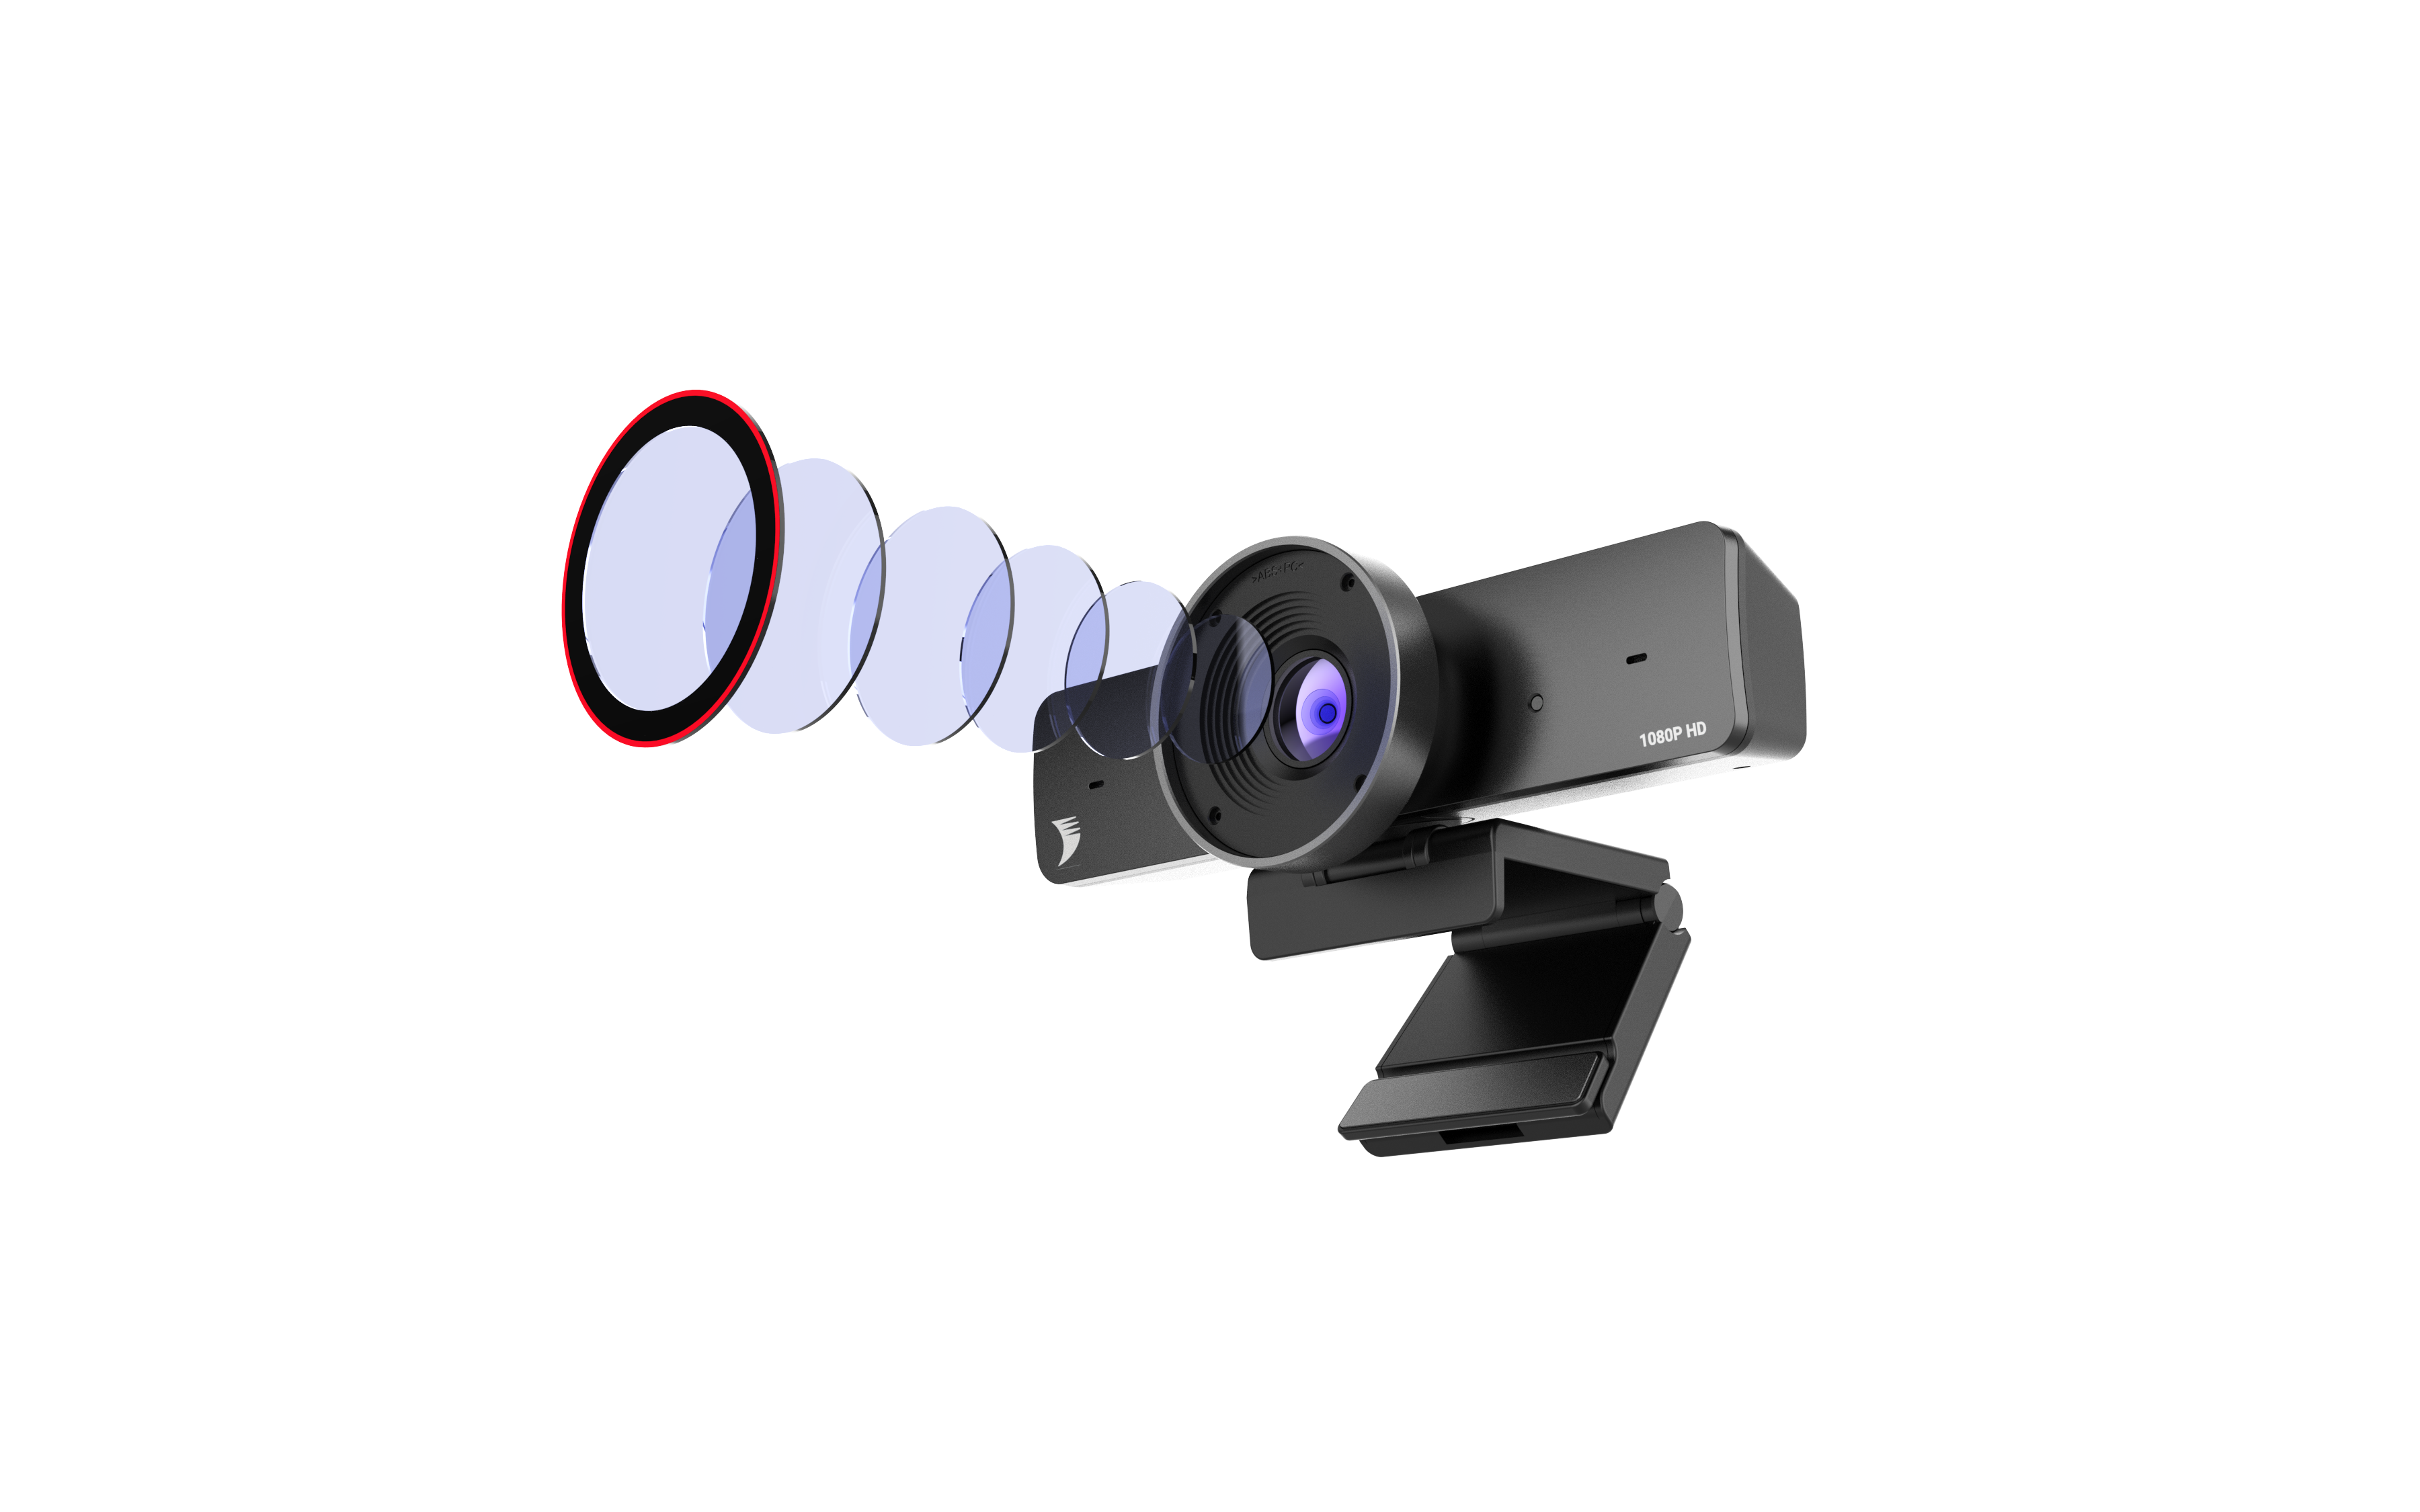 WyreStorm Introduces FOCUS 100 Full HD Business Webcam to Facilitate Video Conferencing, Live Streaming & Online Chatting in both Home and Office Applications